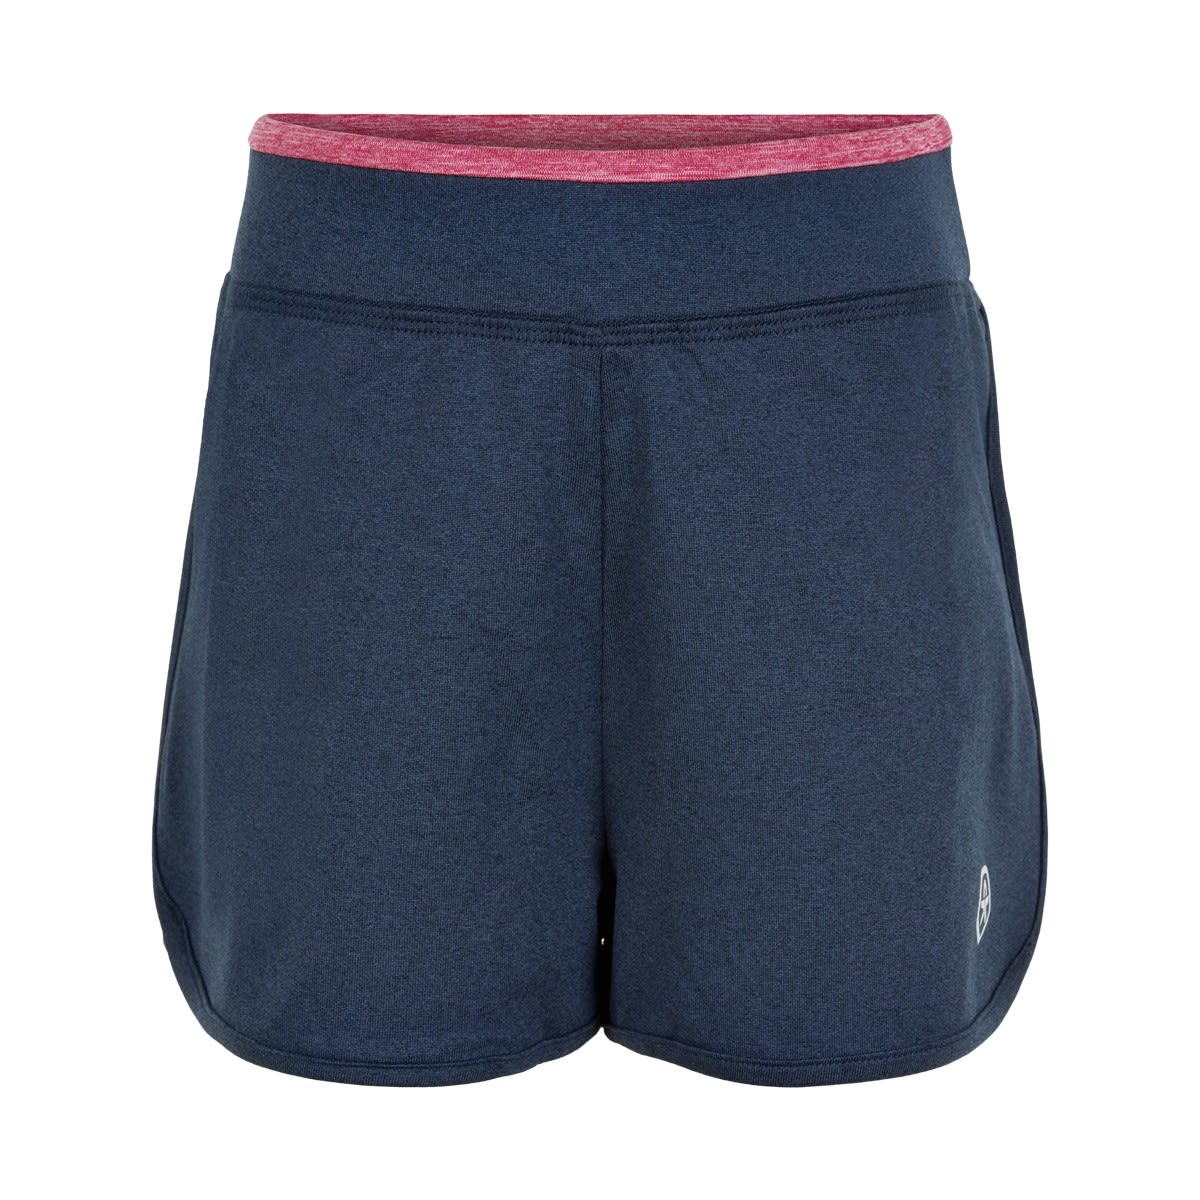 Image of Color Kids Girls Shorts With Zipper